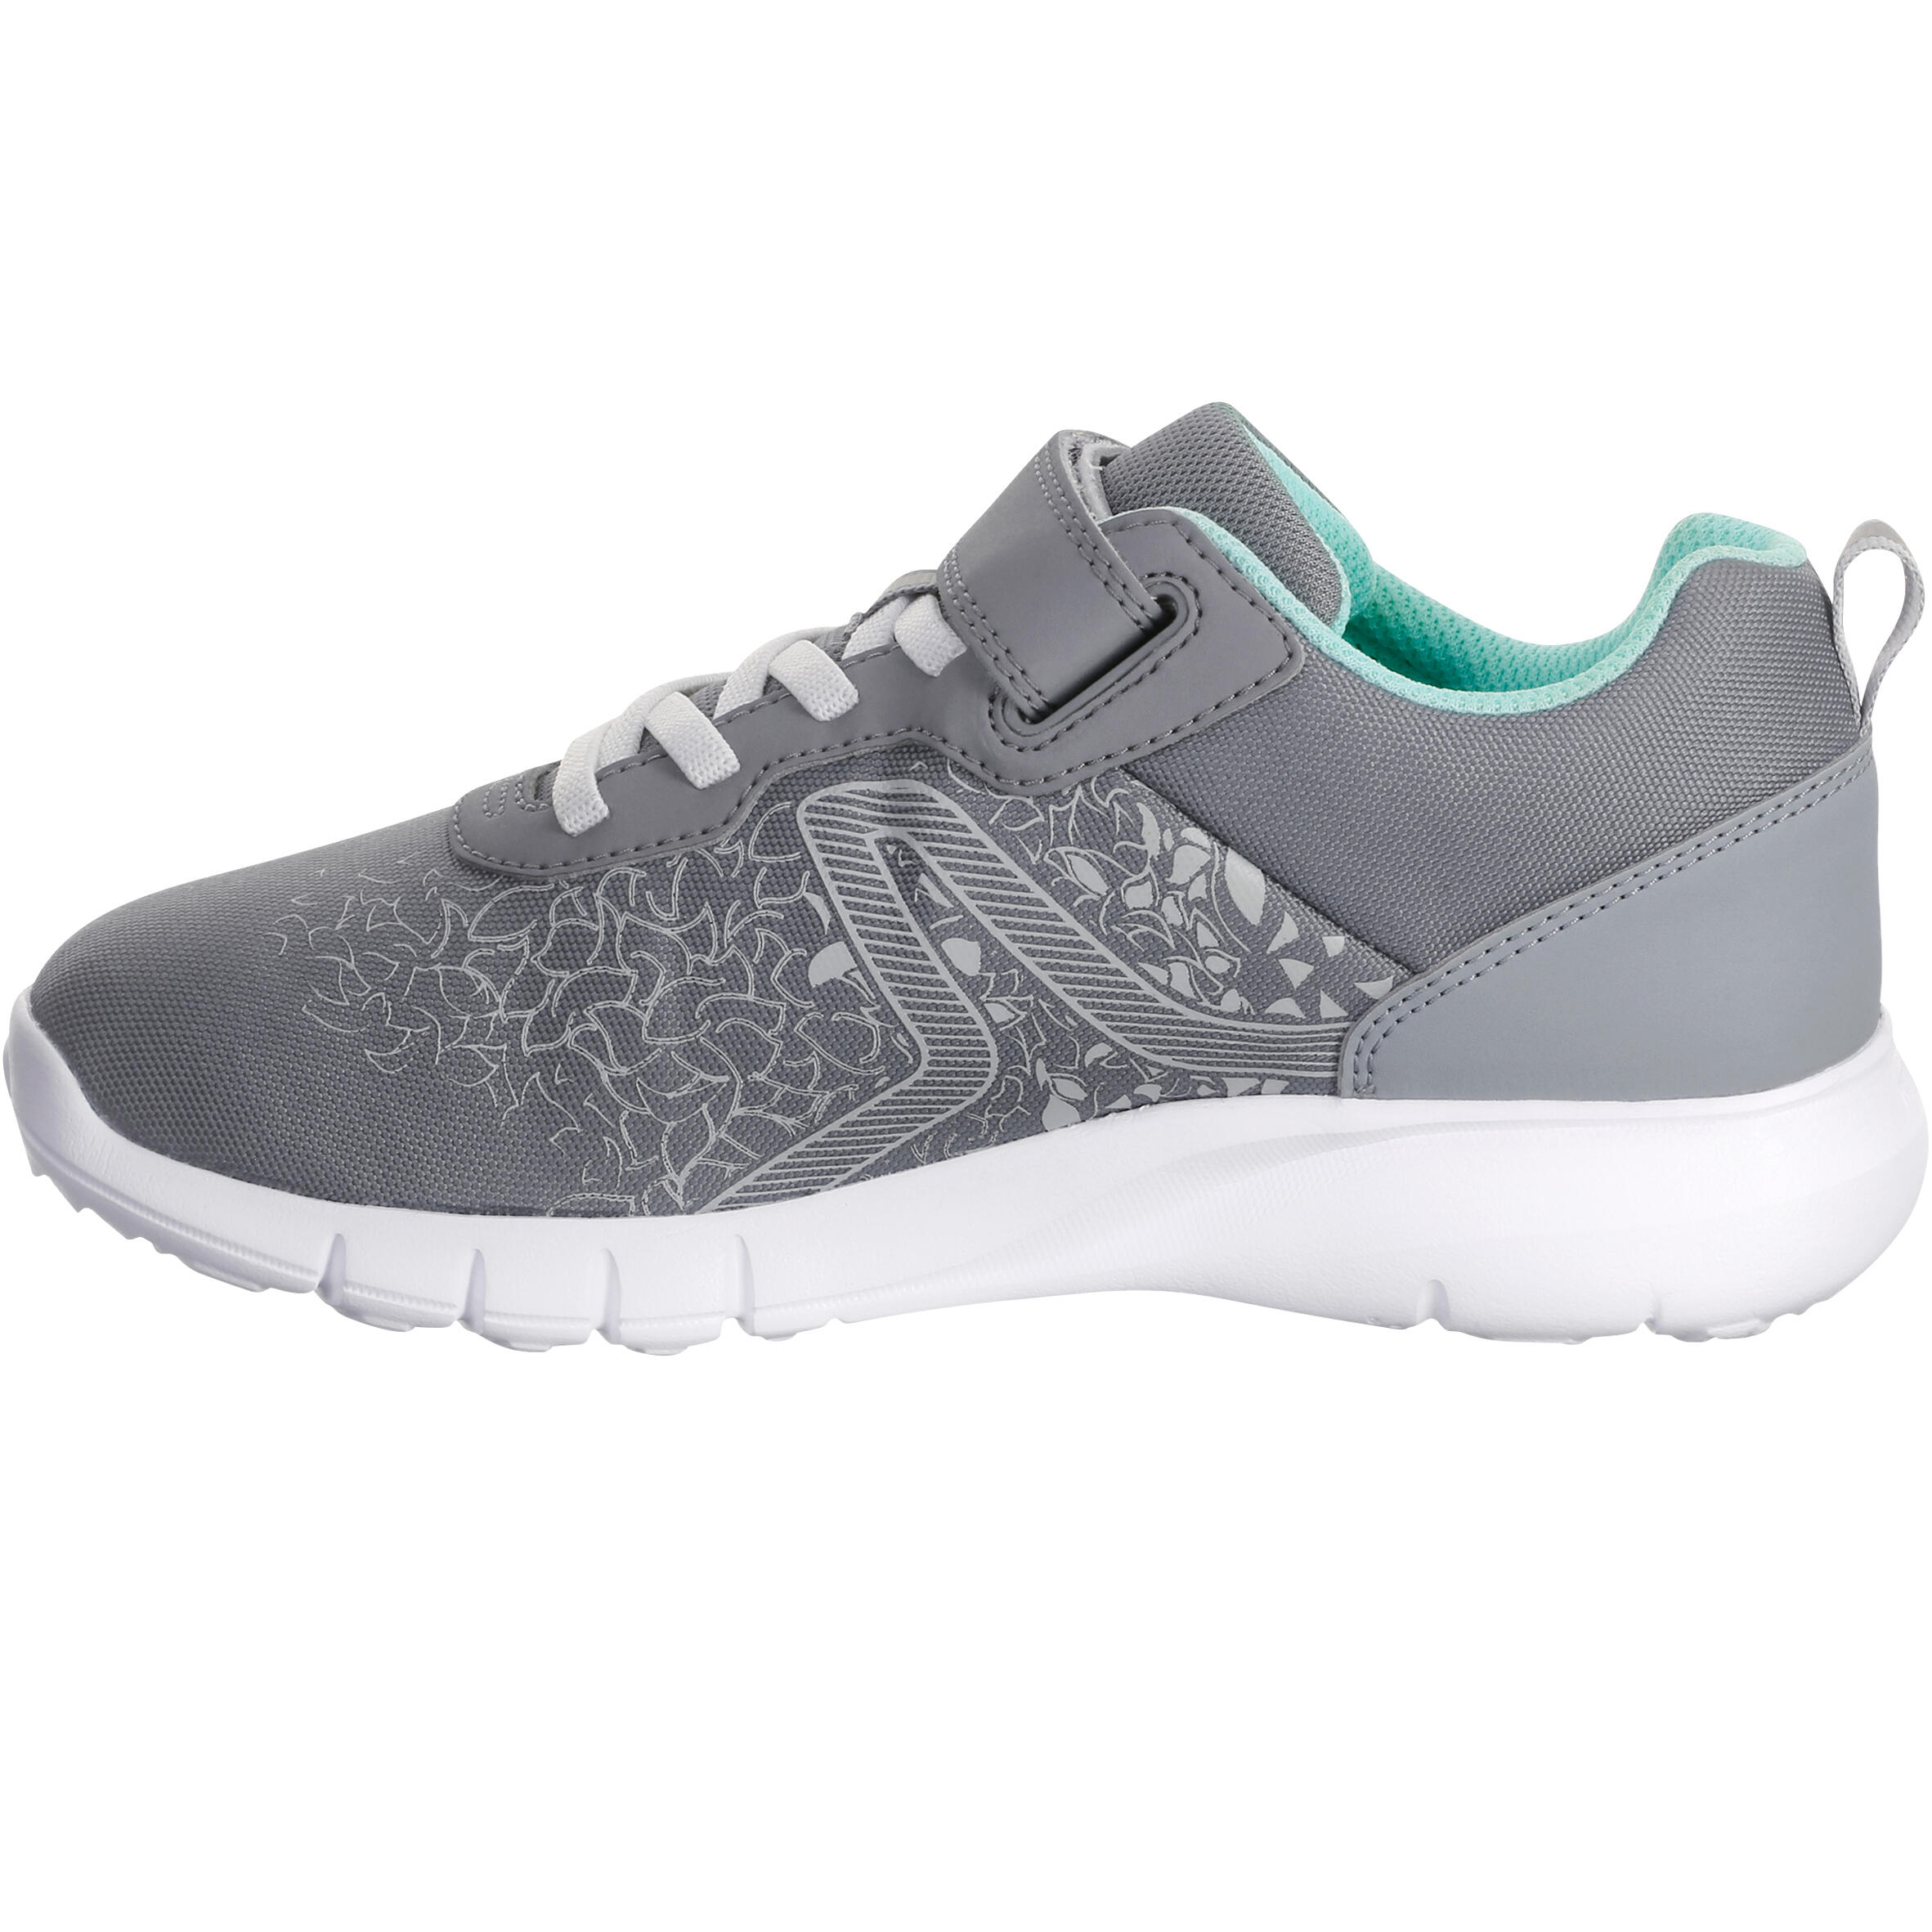 Soft 140 children's fitness walking shoes grey/turquoise 3/12